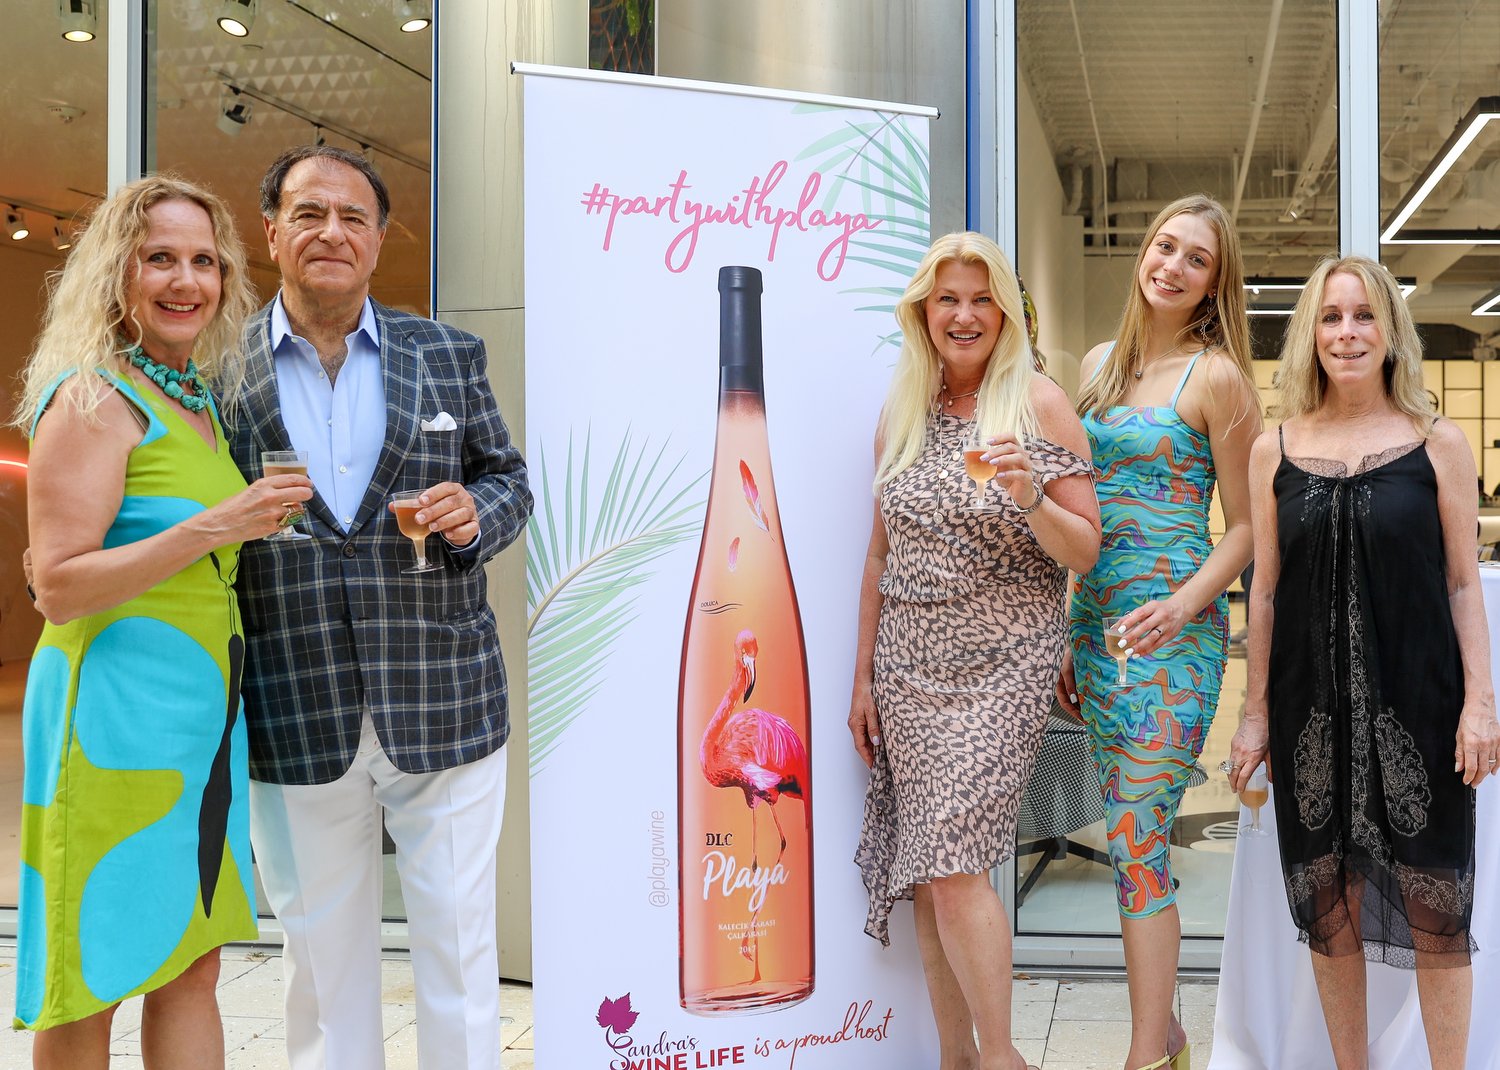 Wine Importer Sandra Guibord Partner with Sibel Kutman Oral and the Legendary Doluca Winery, launch their first Premium Turkish Rosé in the U.S.: ‘Playa Rosé’